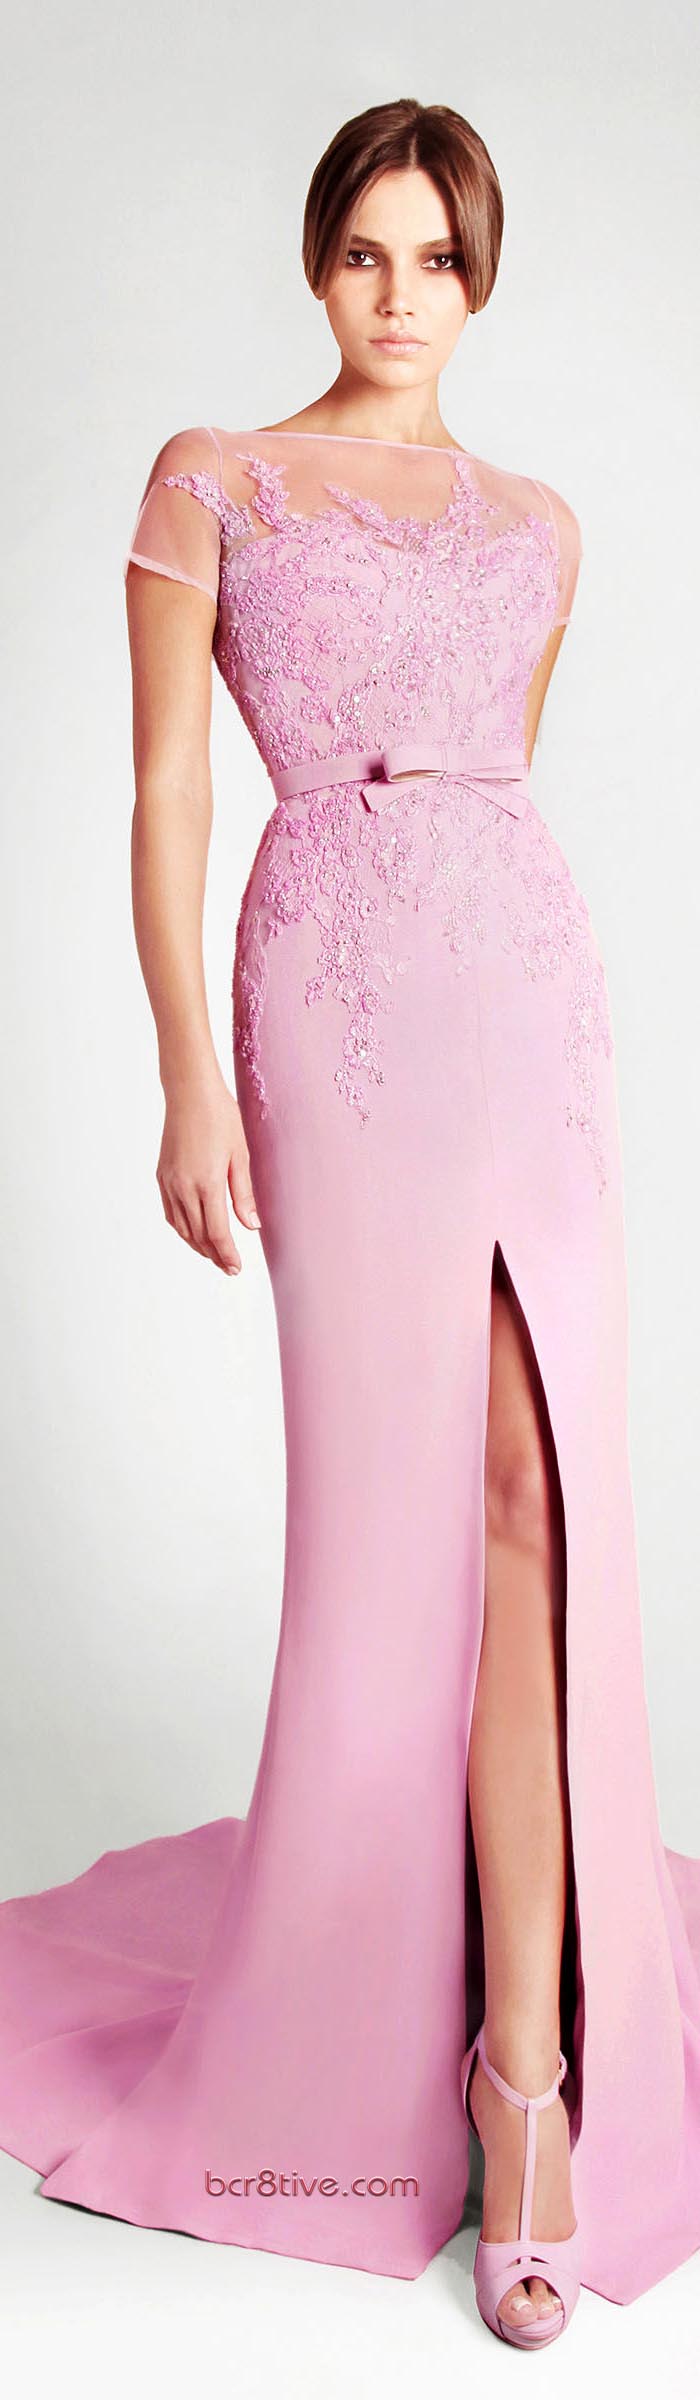 Georges Hobeika Ready to Wear Signature Spring Summer 2013